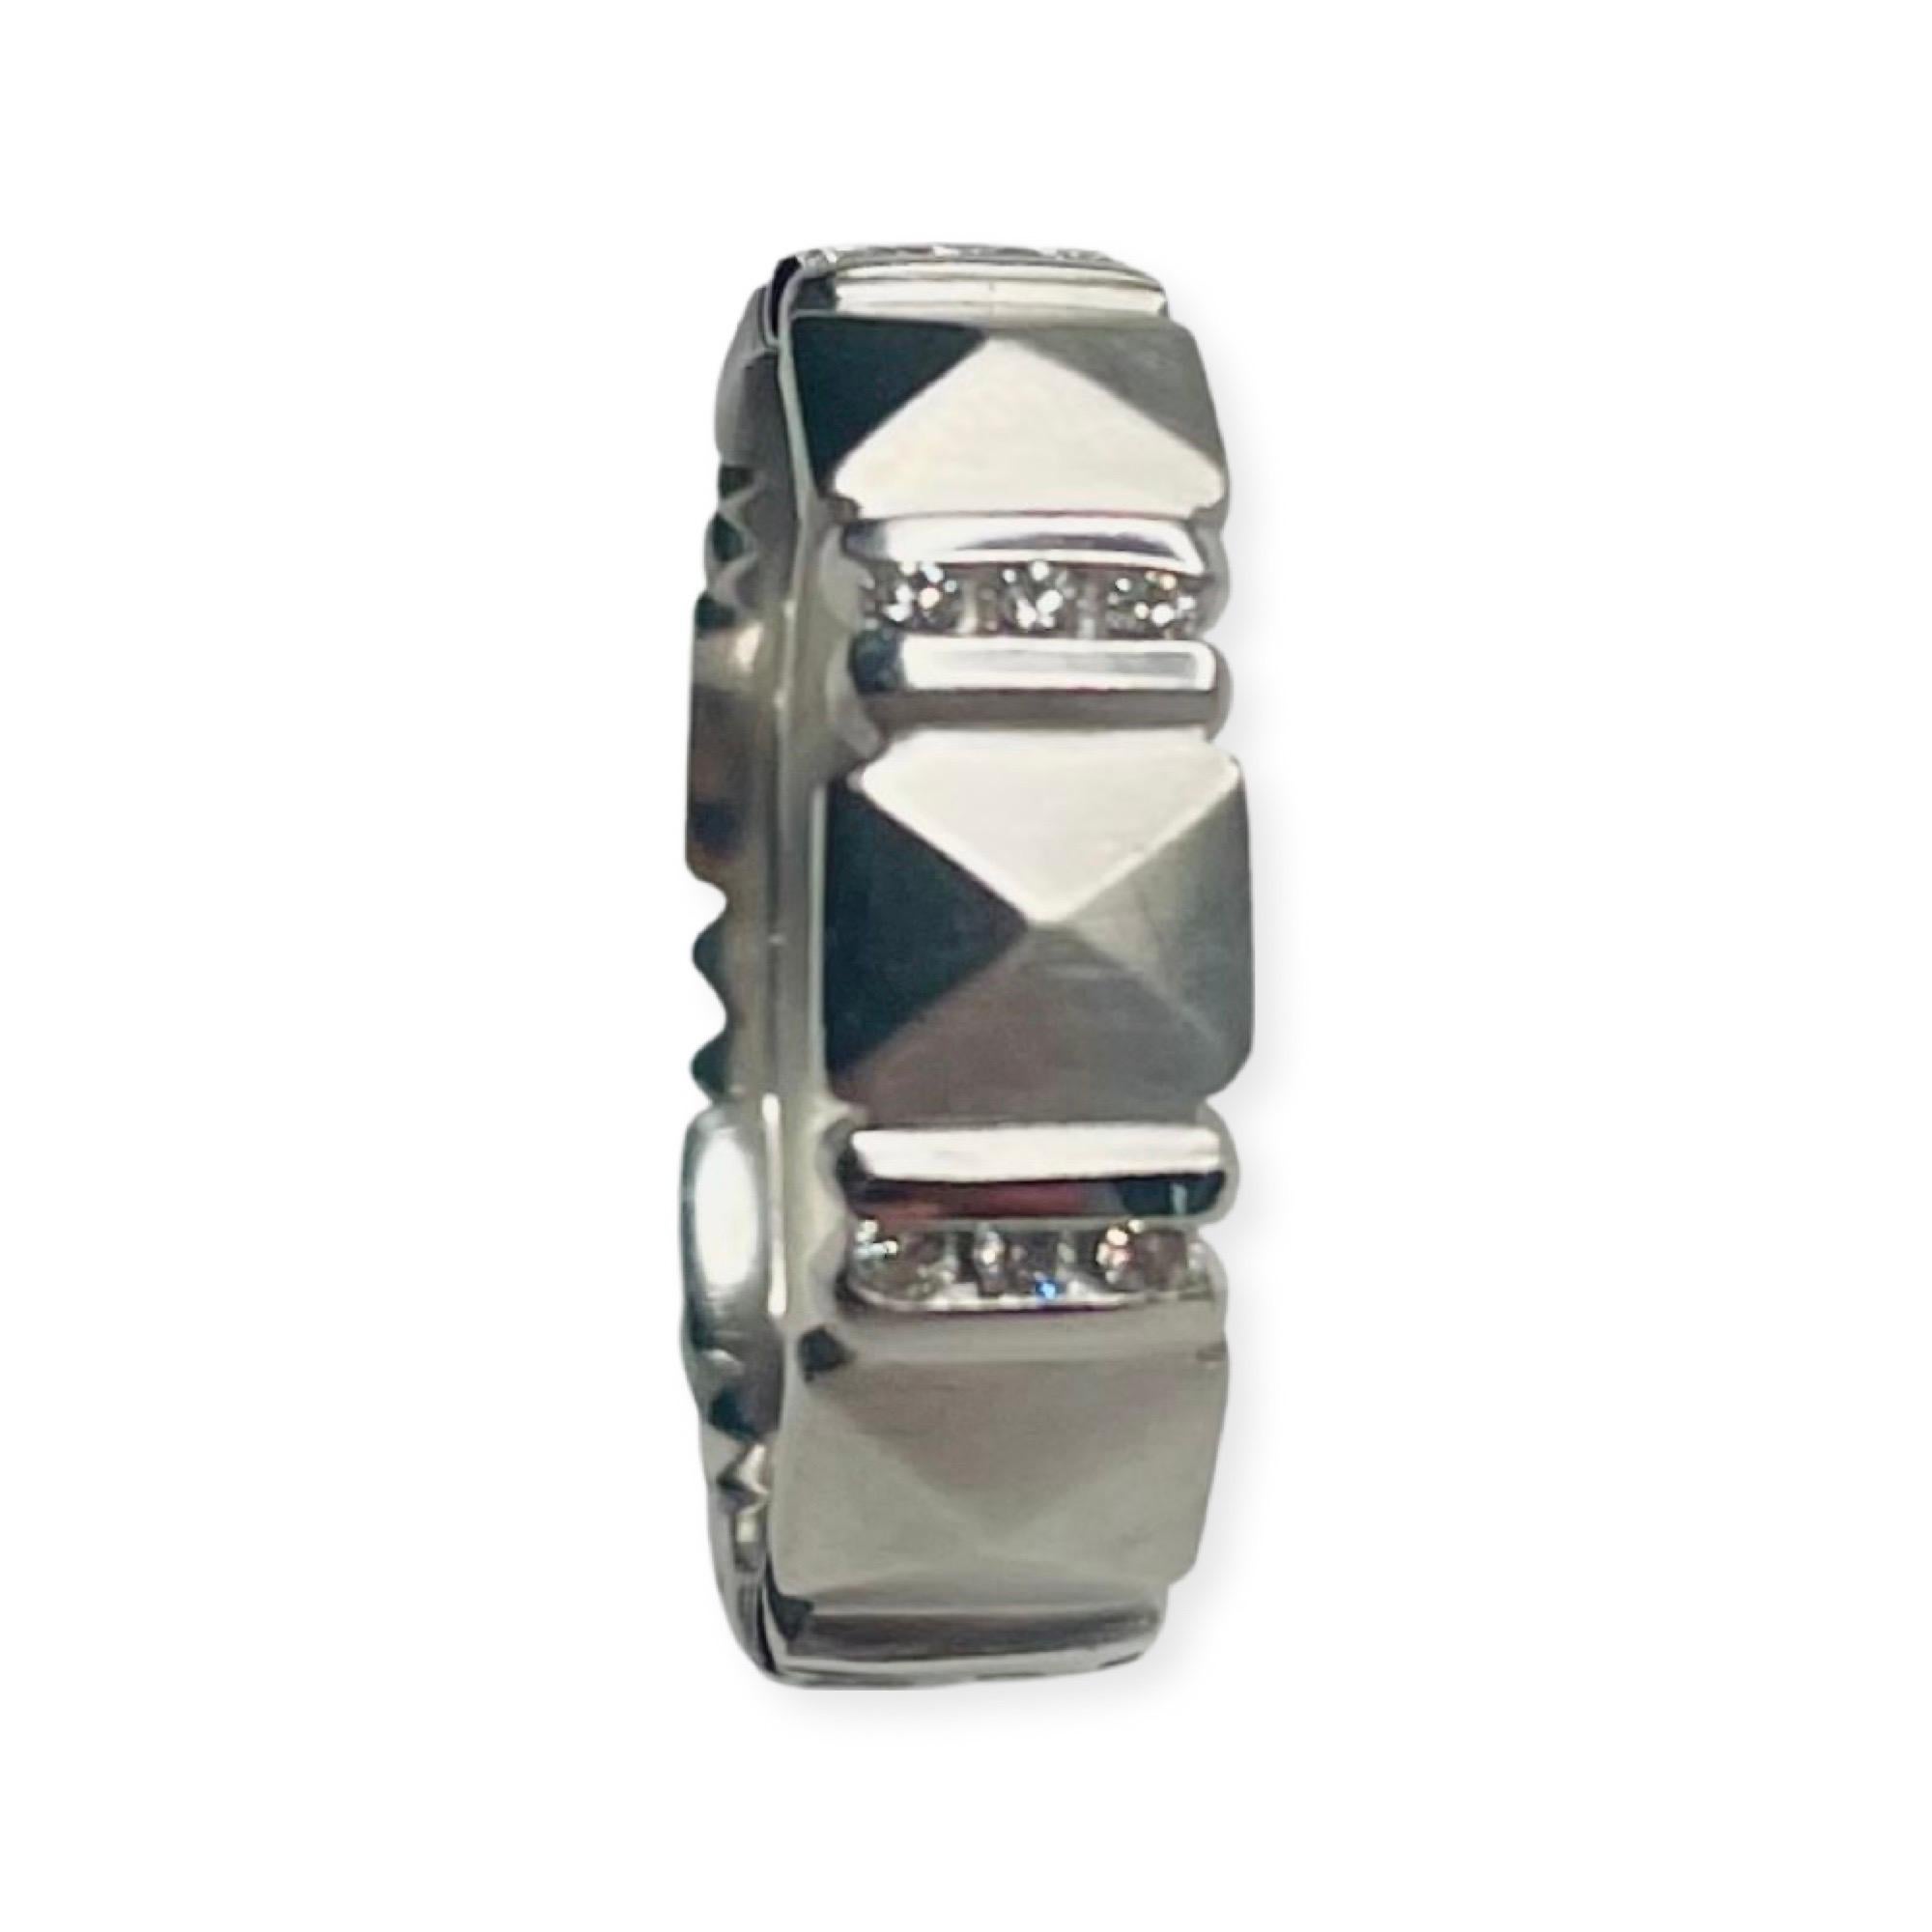 Chris Correia Platinum and Diamond Ring. This ring is 6.0 mm wide and is called the 